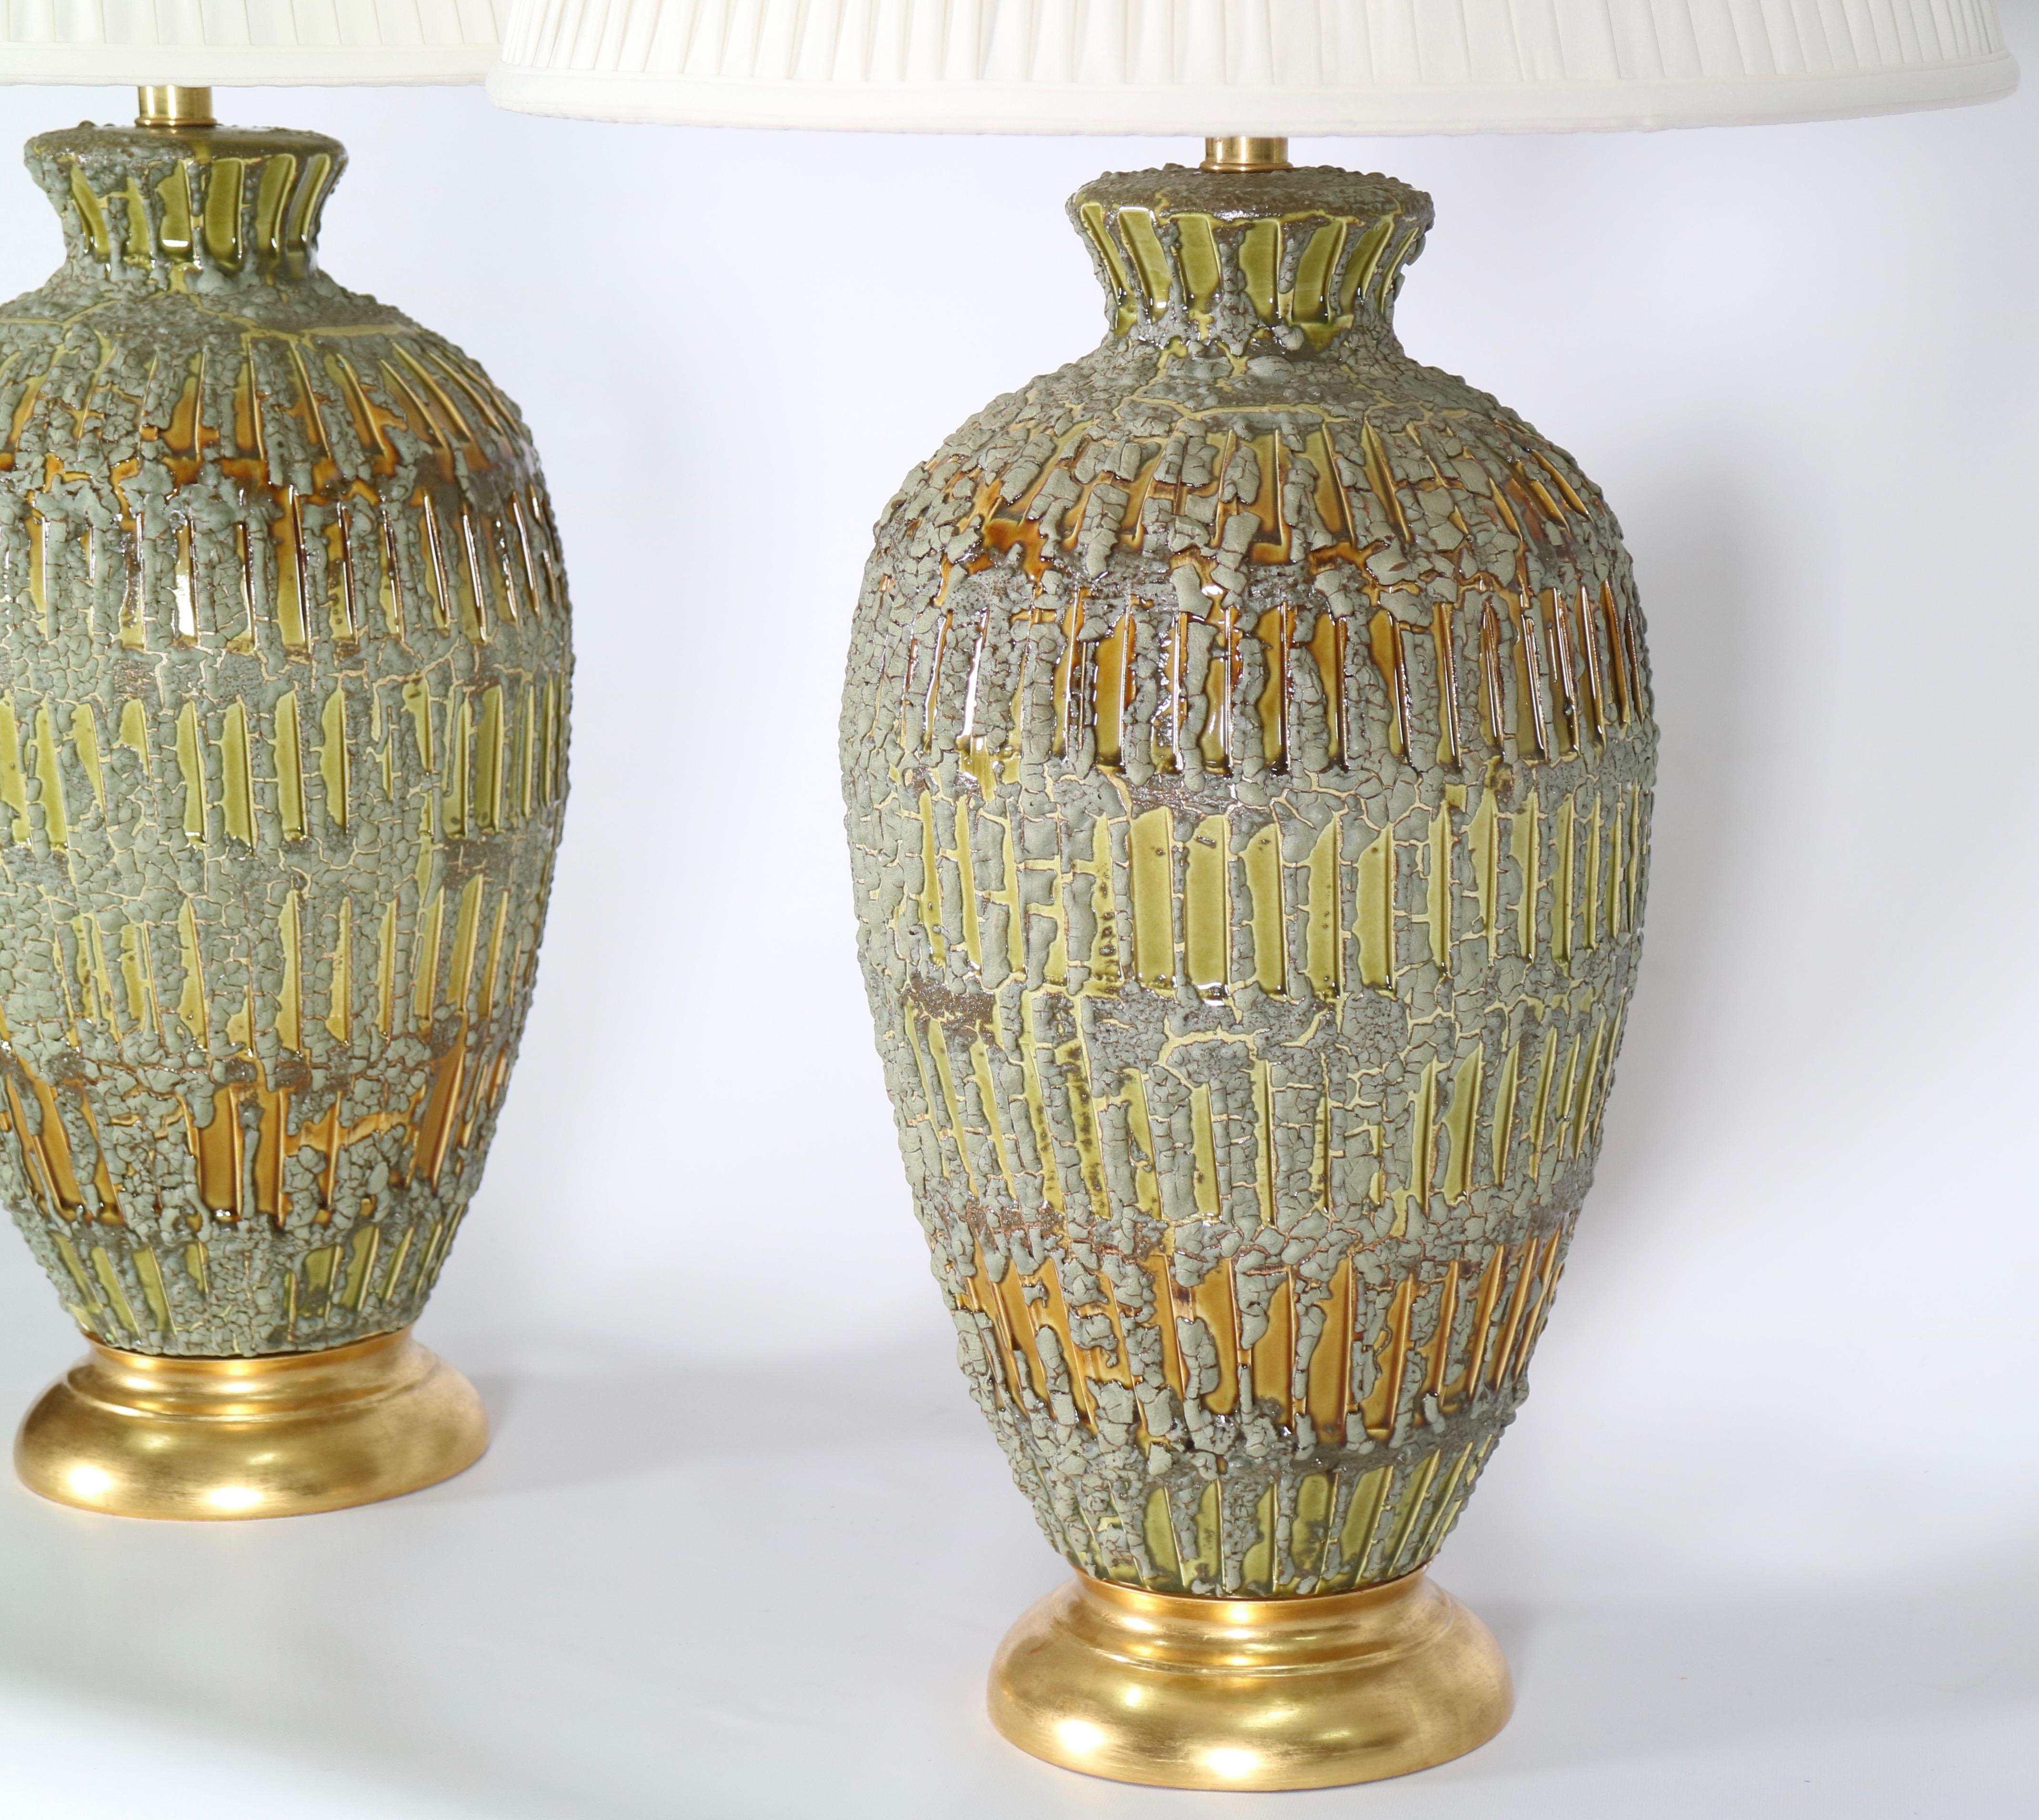 Italian Hollywood Regency ceramic lamps with a textured drip glaze in green and gold tones. Each is mounted to a gilded wooden base. These lamps date from the 1950s and are in excellent vintage condition having wear consistent with age and use.